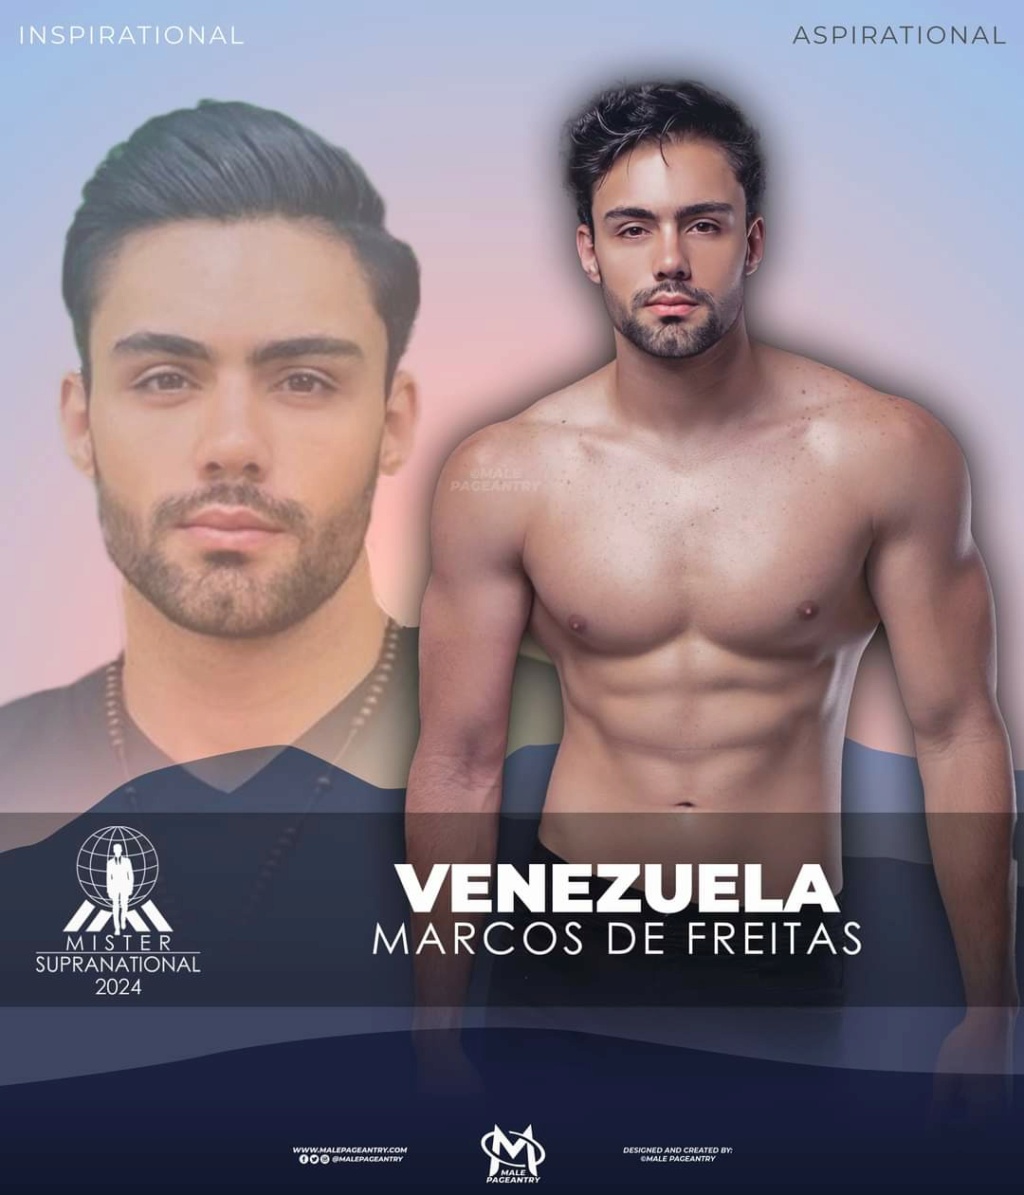 Mister Supranational 2024 will be on July 4. Fb_i7823